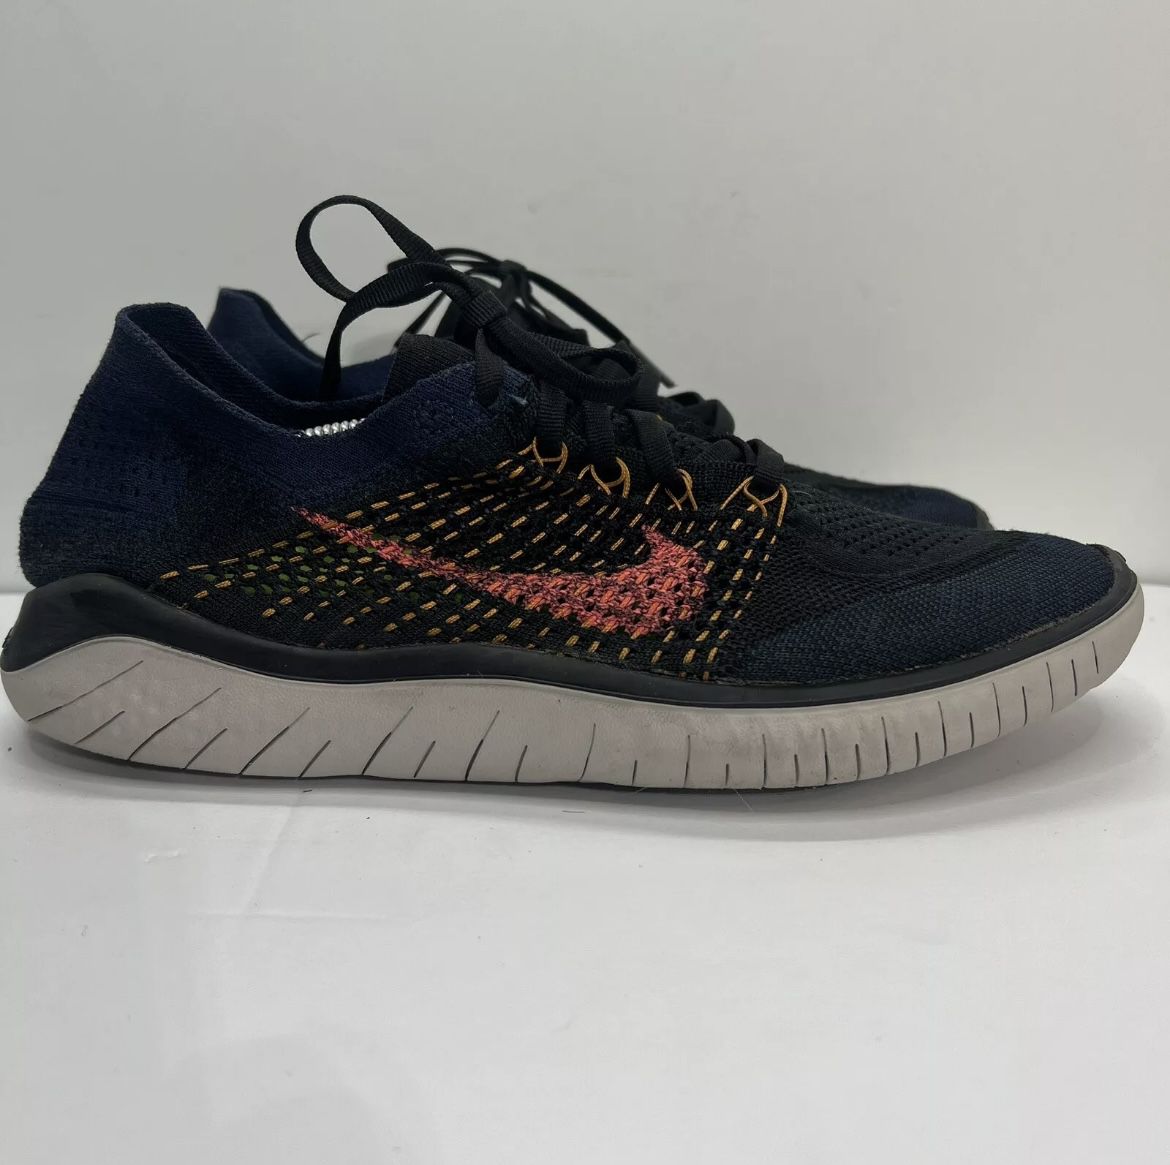 Nike Free RN Flyknit Athletic Training Shoes